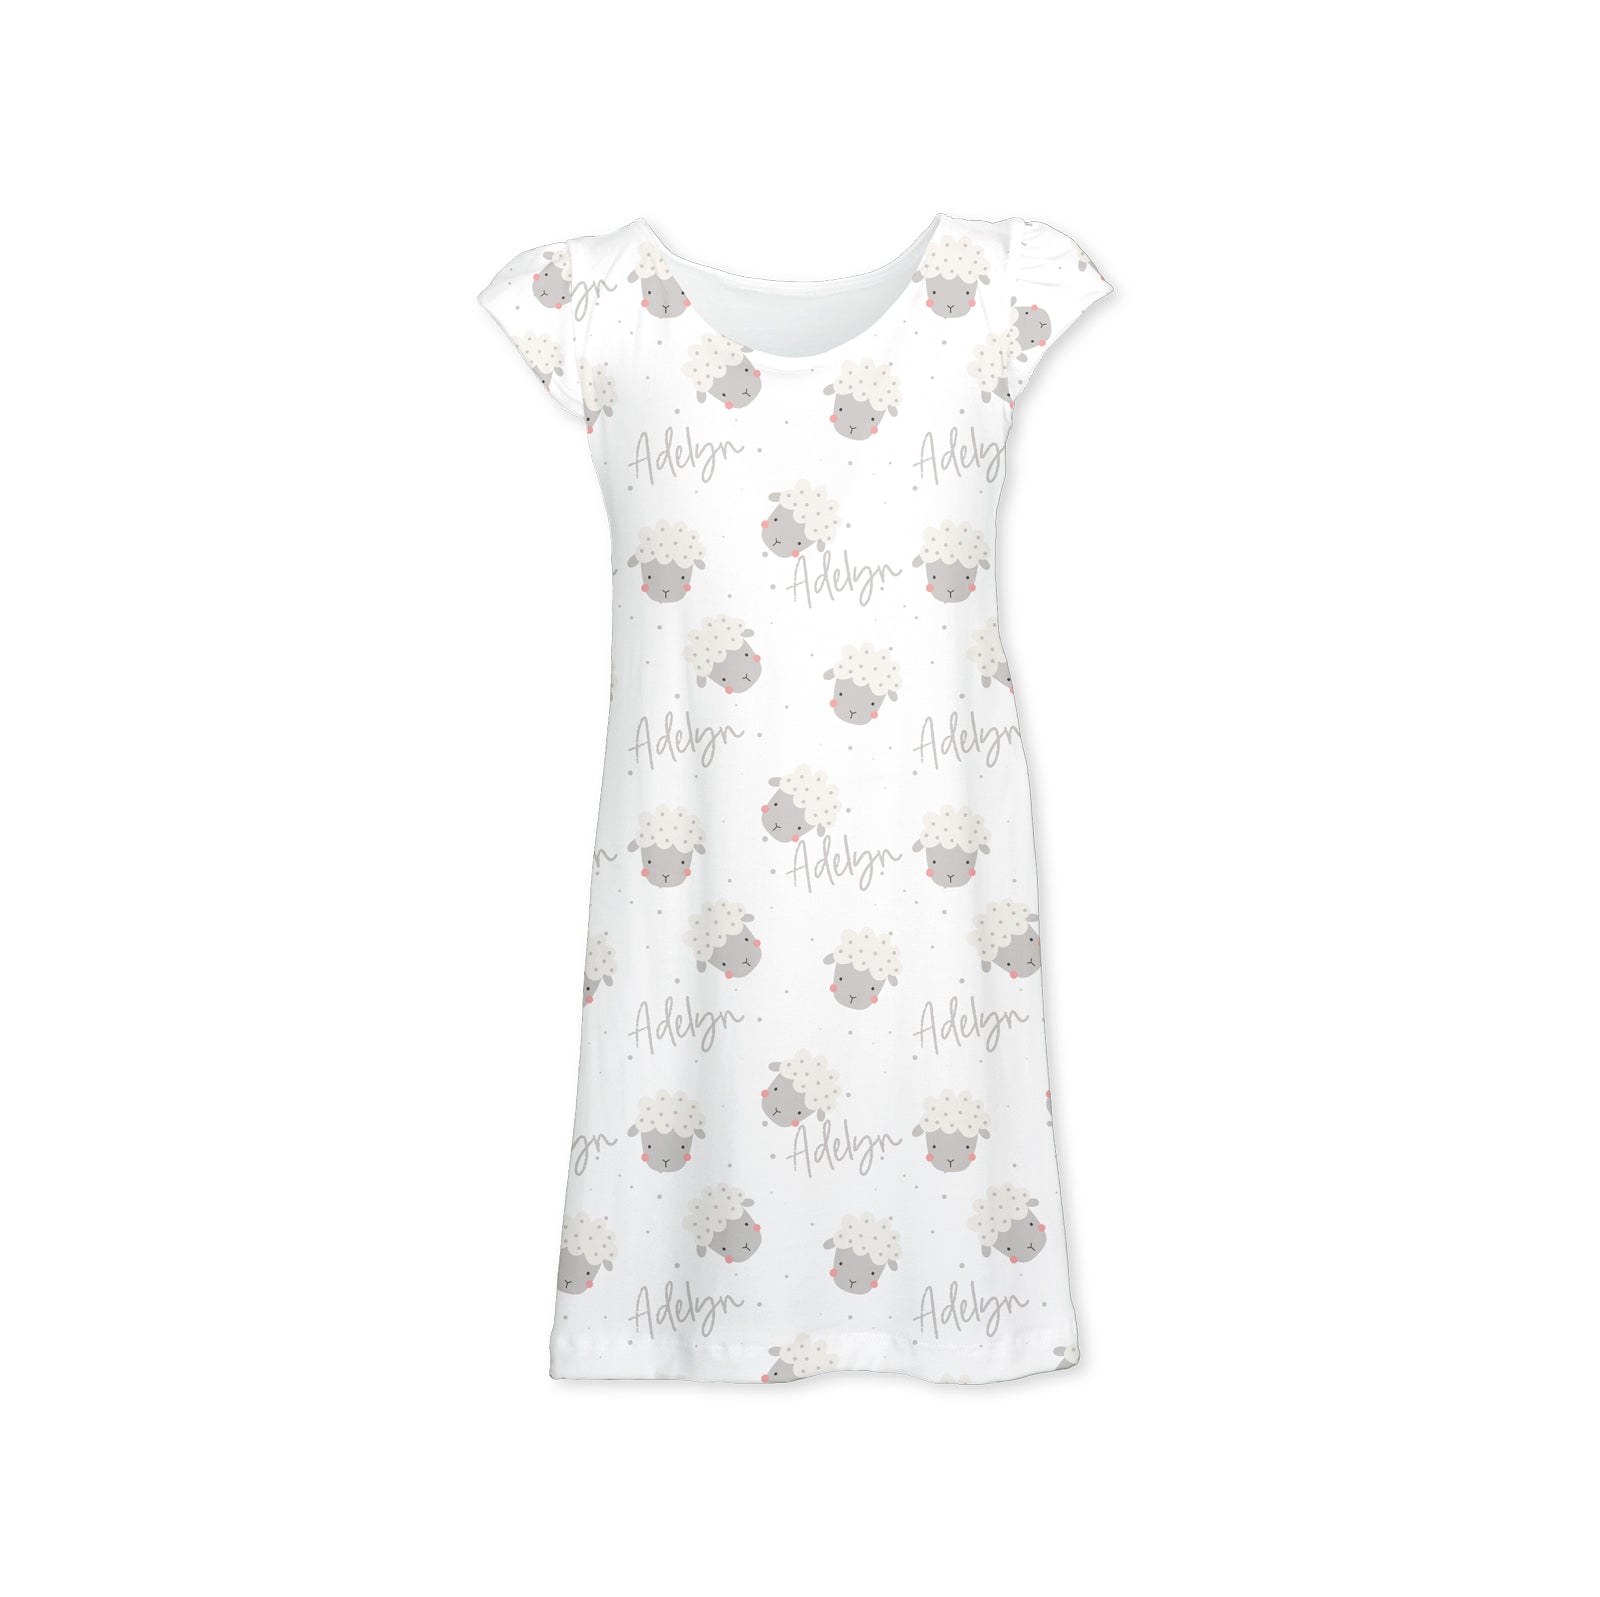 Personalized Nightgown & Matching Doll PJs